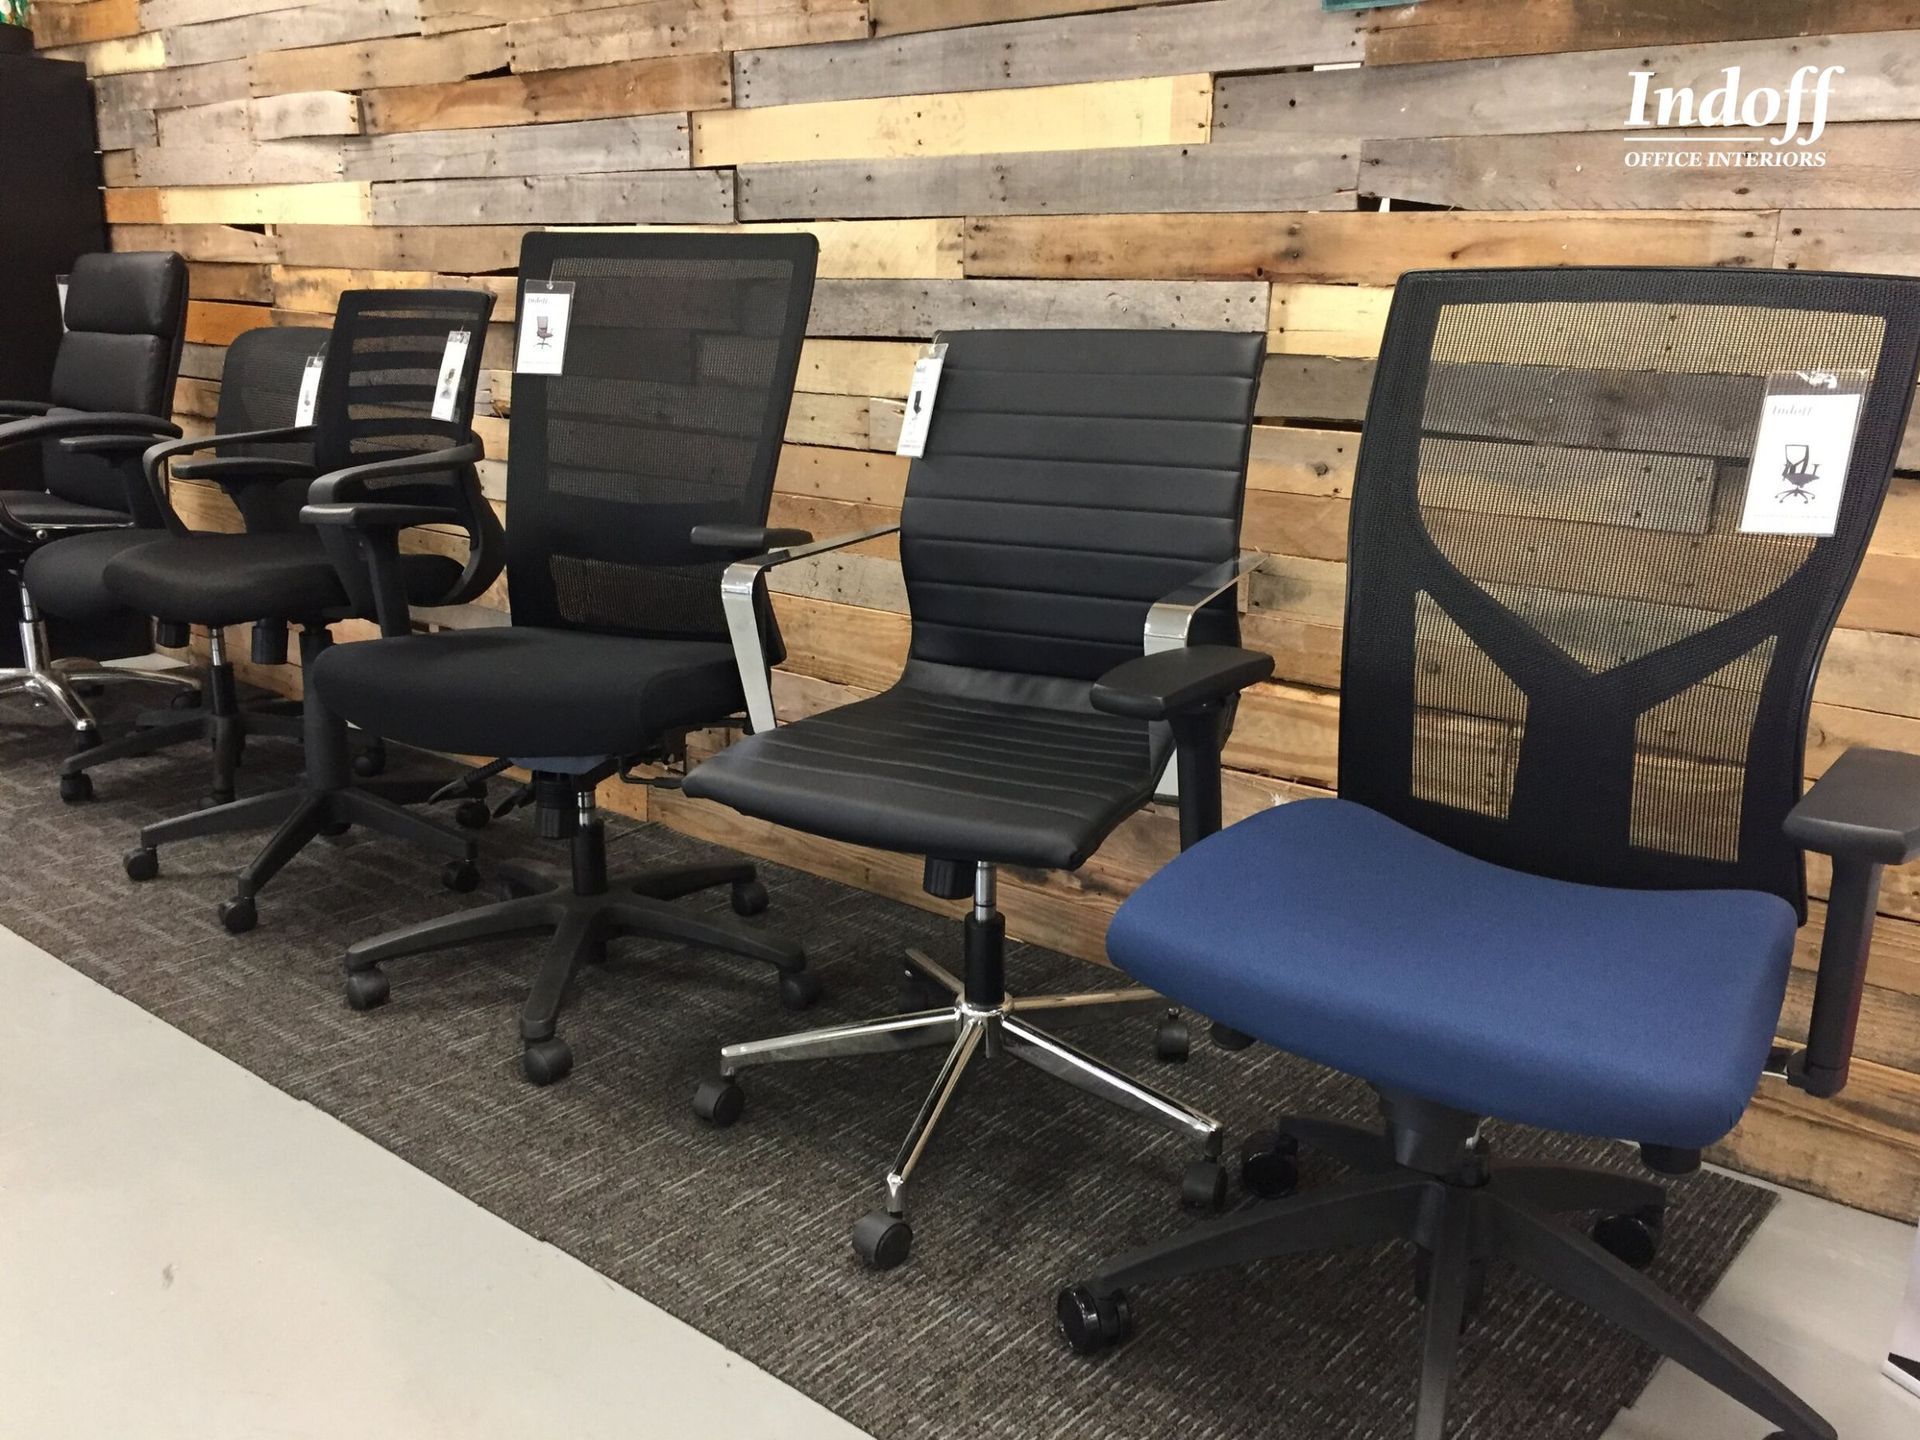 Our showroom features dozens of chairs. We encourage you to test out a chair before making your finalize selection.